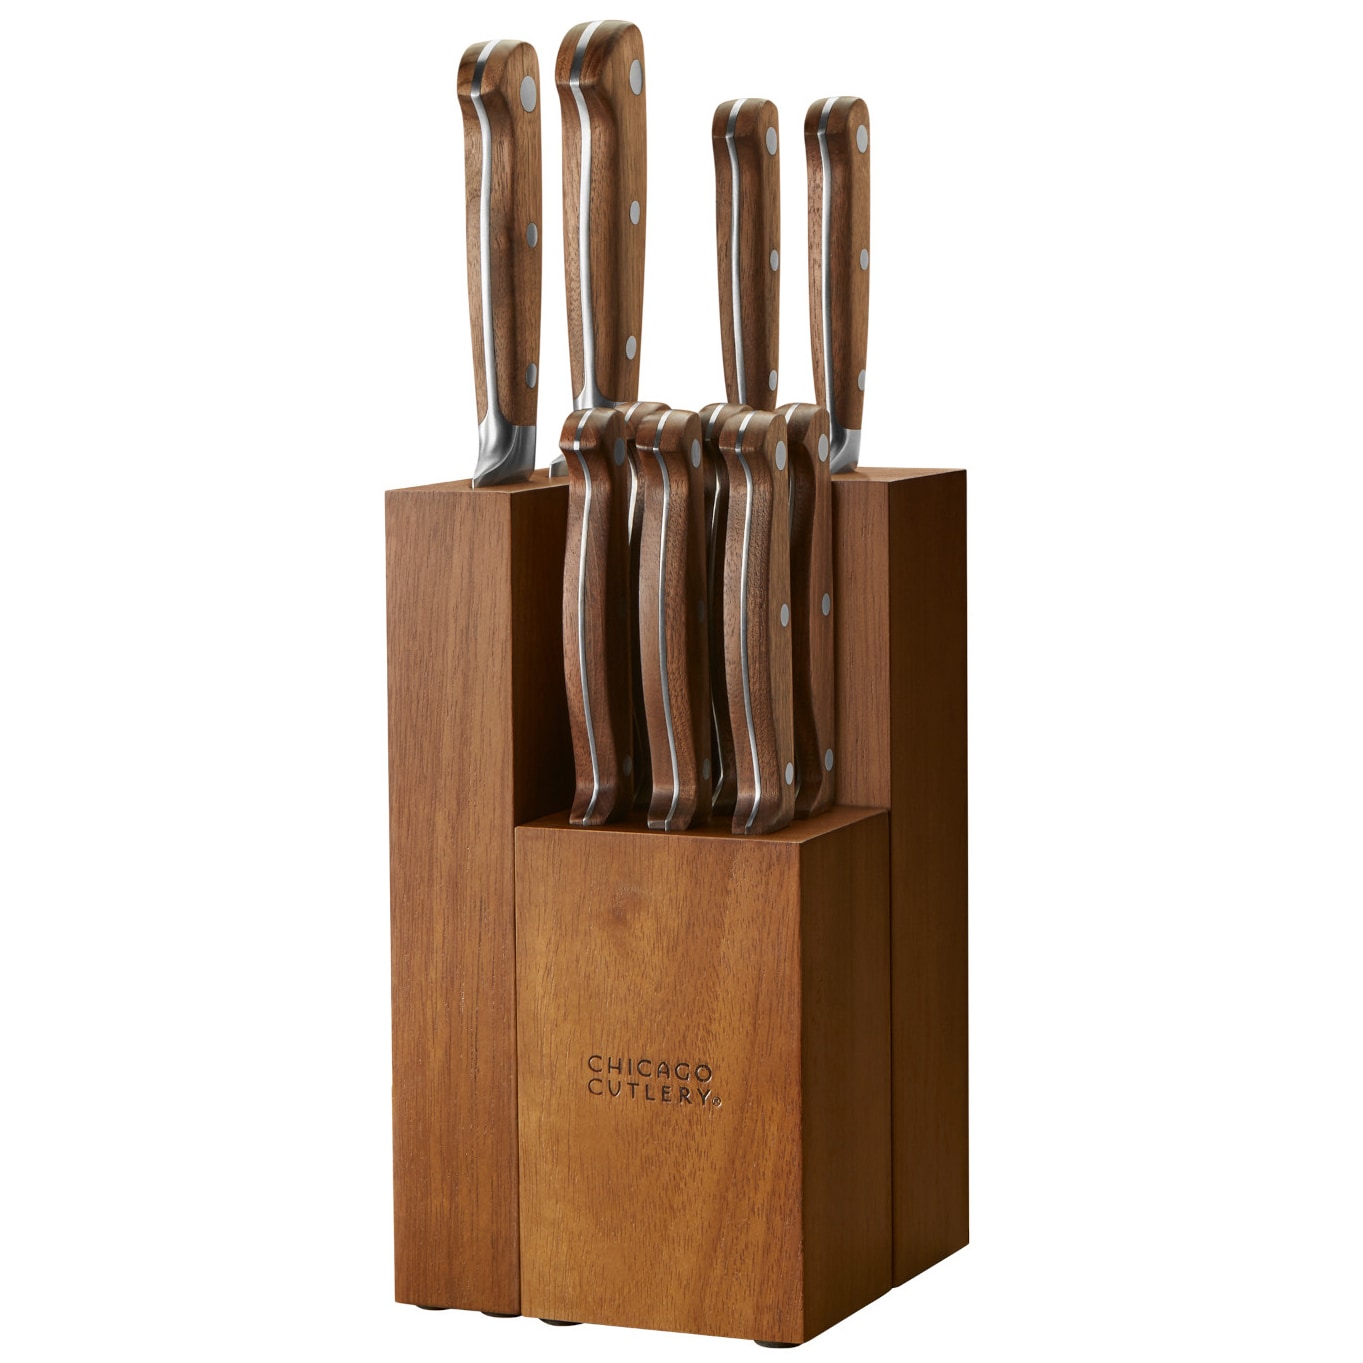 Chicago Cutlery Elston 16pc Knife Set with Block - Stainless Steel